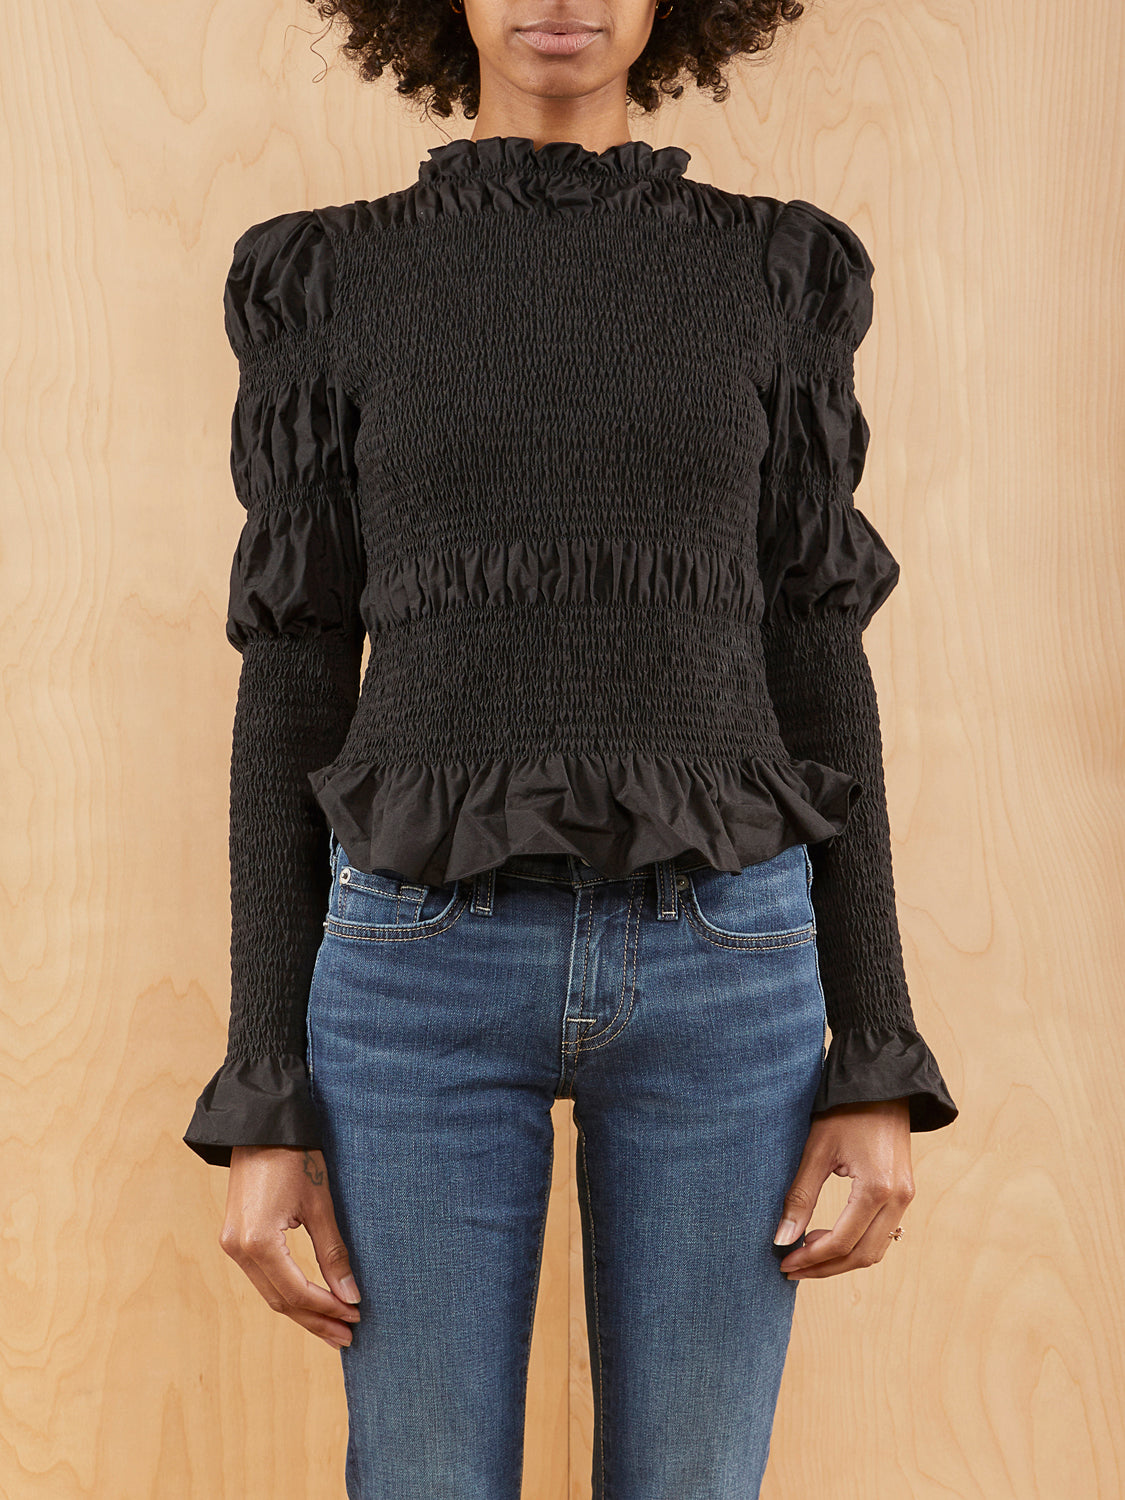 & Other Stories Black Rouched Blouse